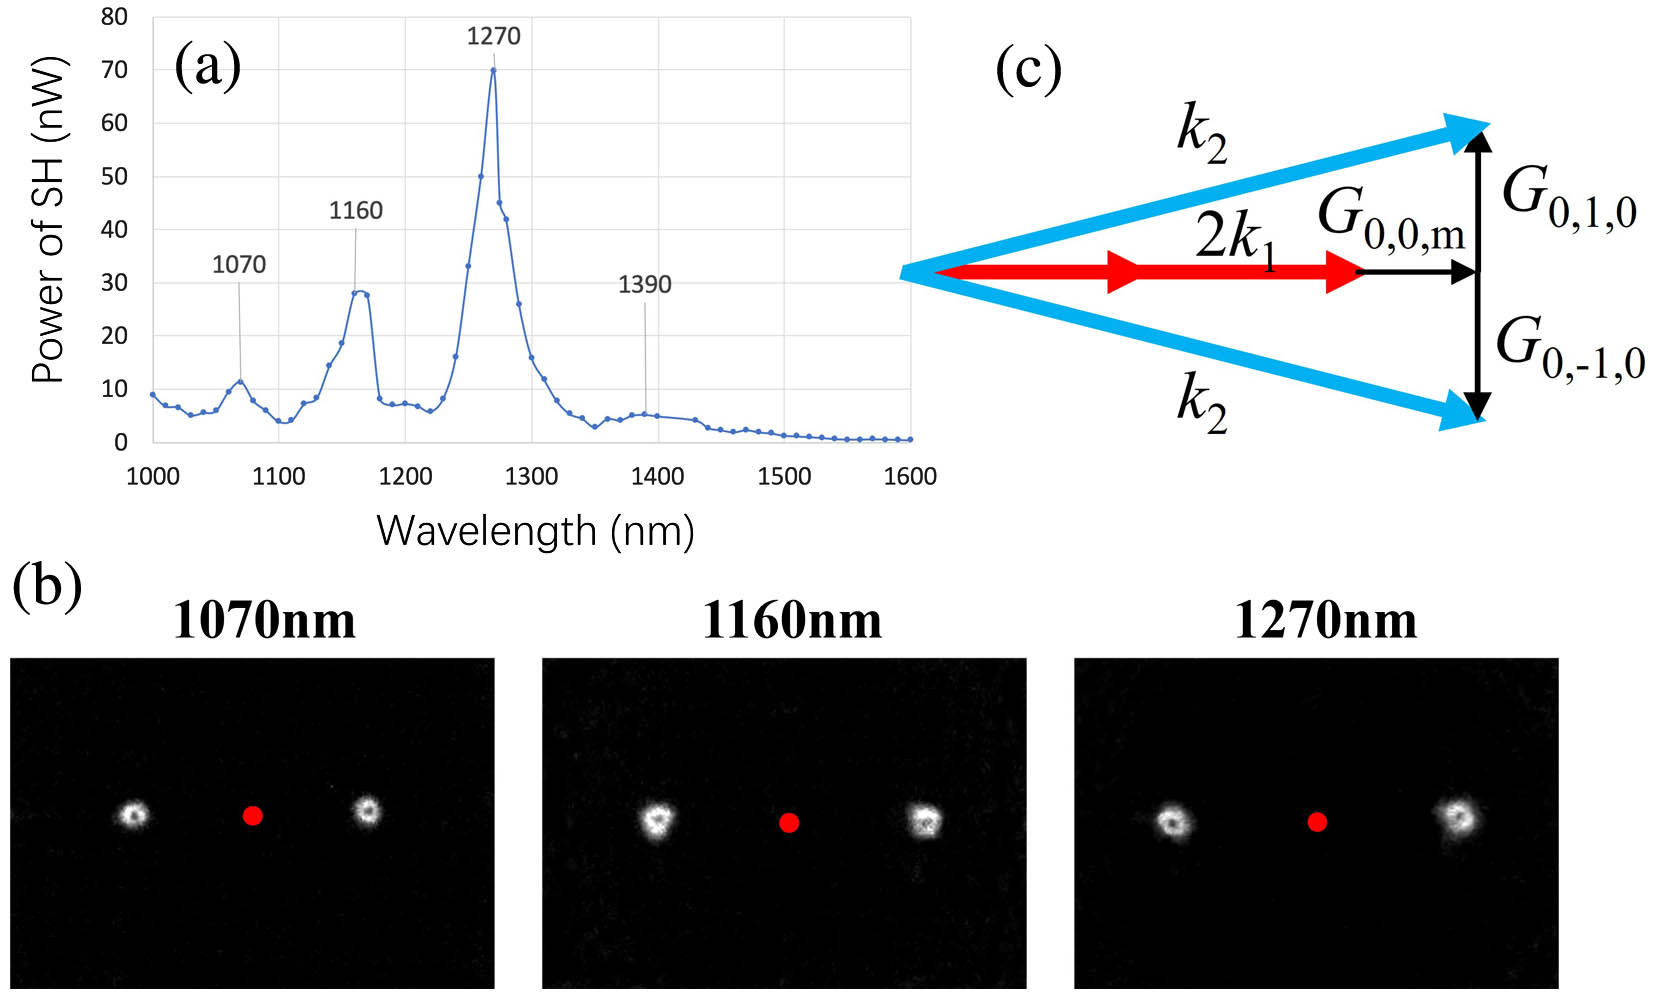 (a) Wavelength tuning response of the SHG in periodic fork-shaped grating at normal incidence; (b) recorded SH images at resonant wavelengths of 1270, 1160, and 1070 nm in the far field. They correspond to QPM interactions involving different orders of longitudinal reciprocal lattice vectors. (c) The phase-matching diagrams at these resonance wavelengths; the transverse phase-matching conditions are the same for these three wavelengths, but the longitudinal conditions are different. From left to right (1070 to 1270 nm), the corresponding reciprocal lattice vectors in the longitudinal direction are G0,0,4, G0,0,3, G0,0,2, i.e., m = 4, 3, 2, respectively.